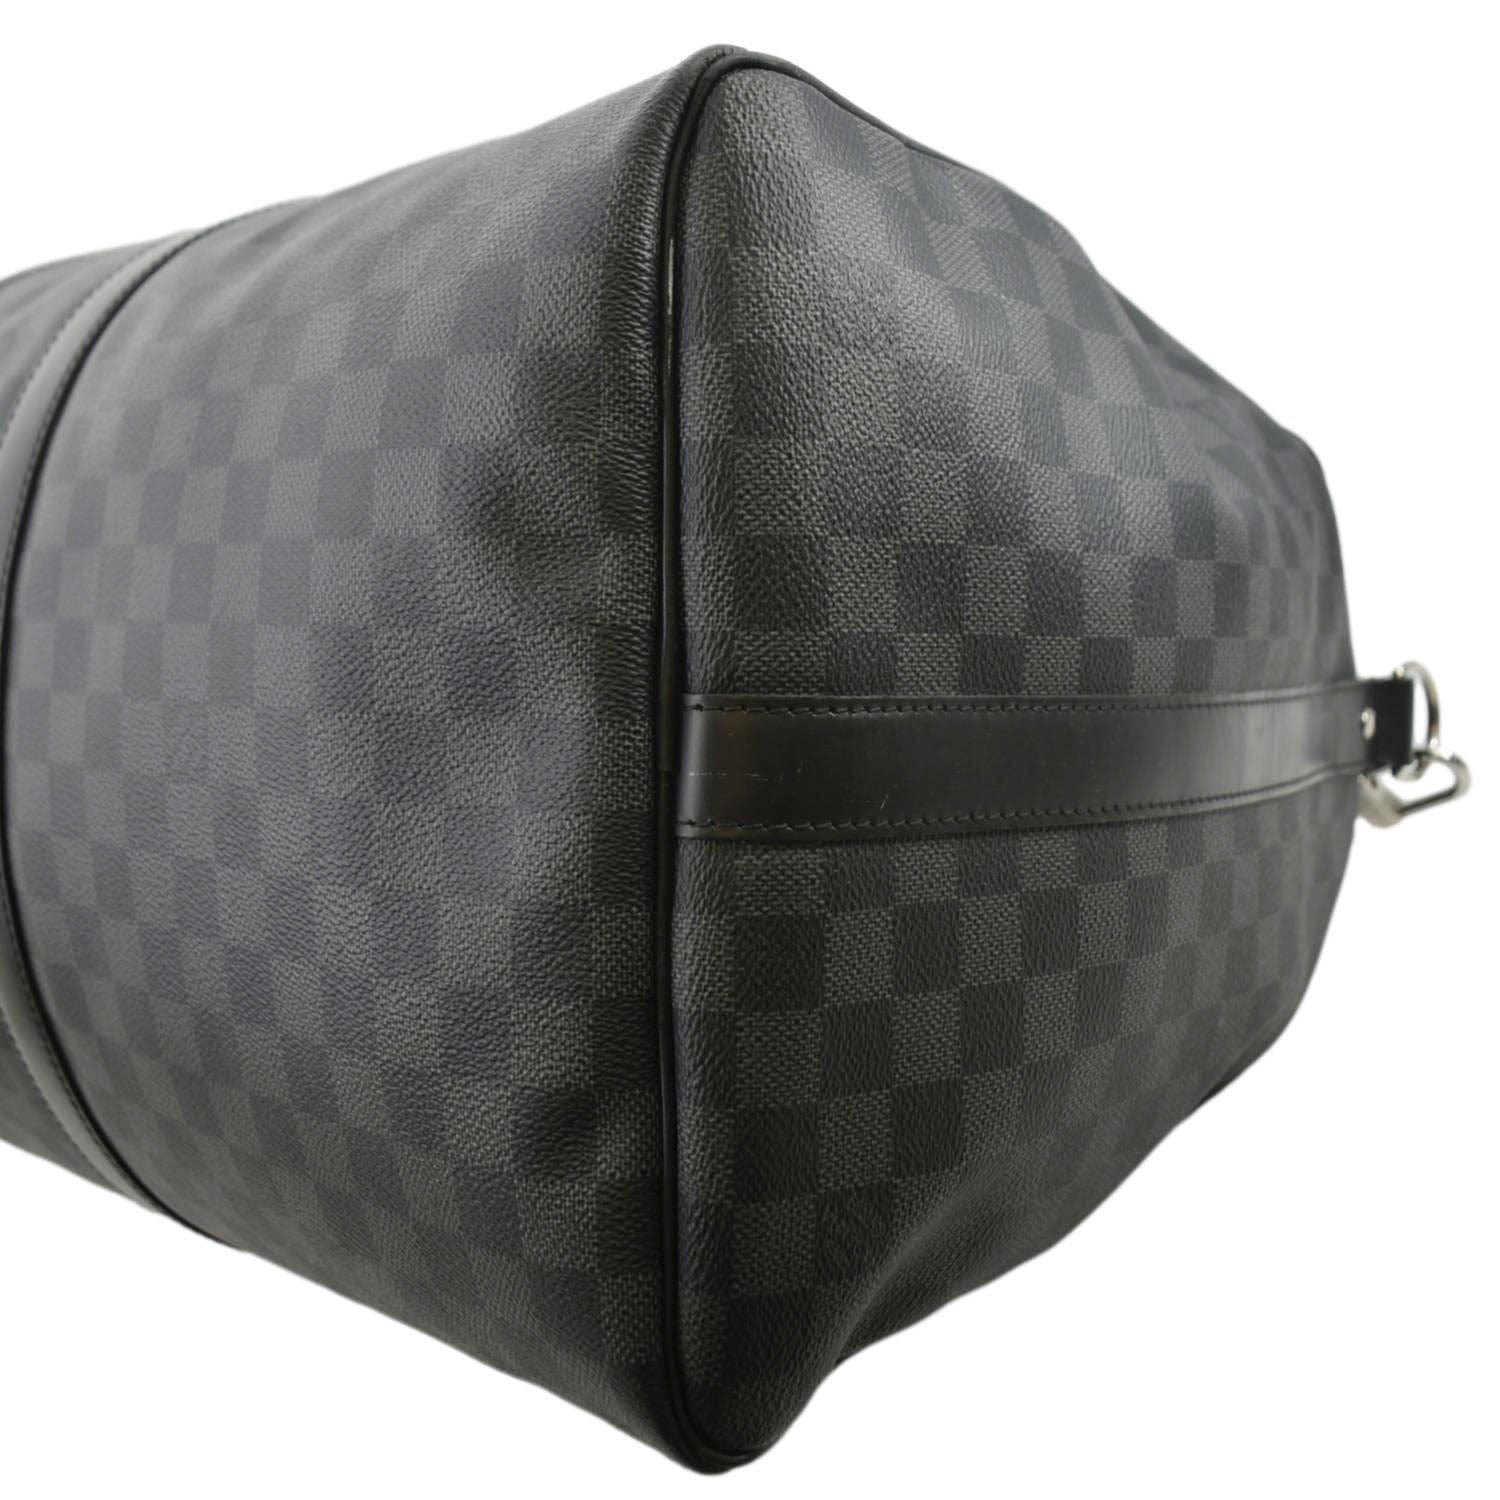 NEW Authentic 2009 LOUIS VUITTON DAMIER KEEPALL 55 BANDOULIERE TRAVEL BAG  N41414